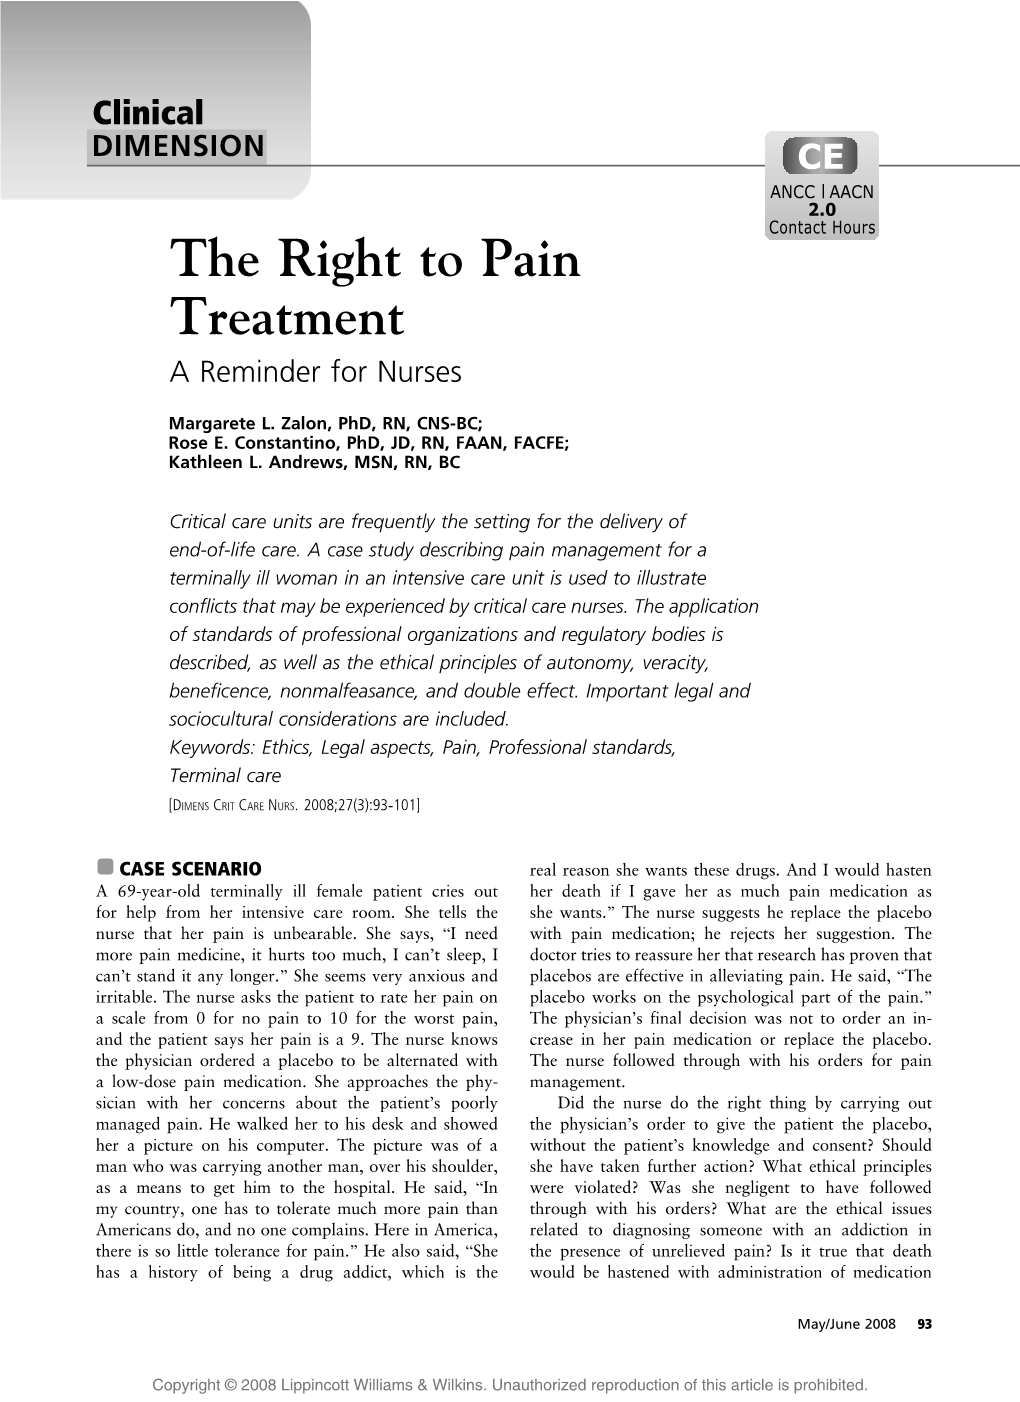 The Right to Pain Treatment a Reminder for Nurses